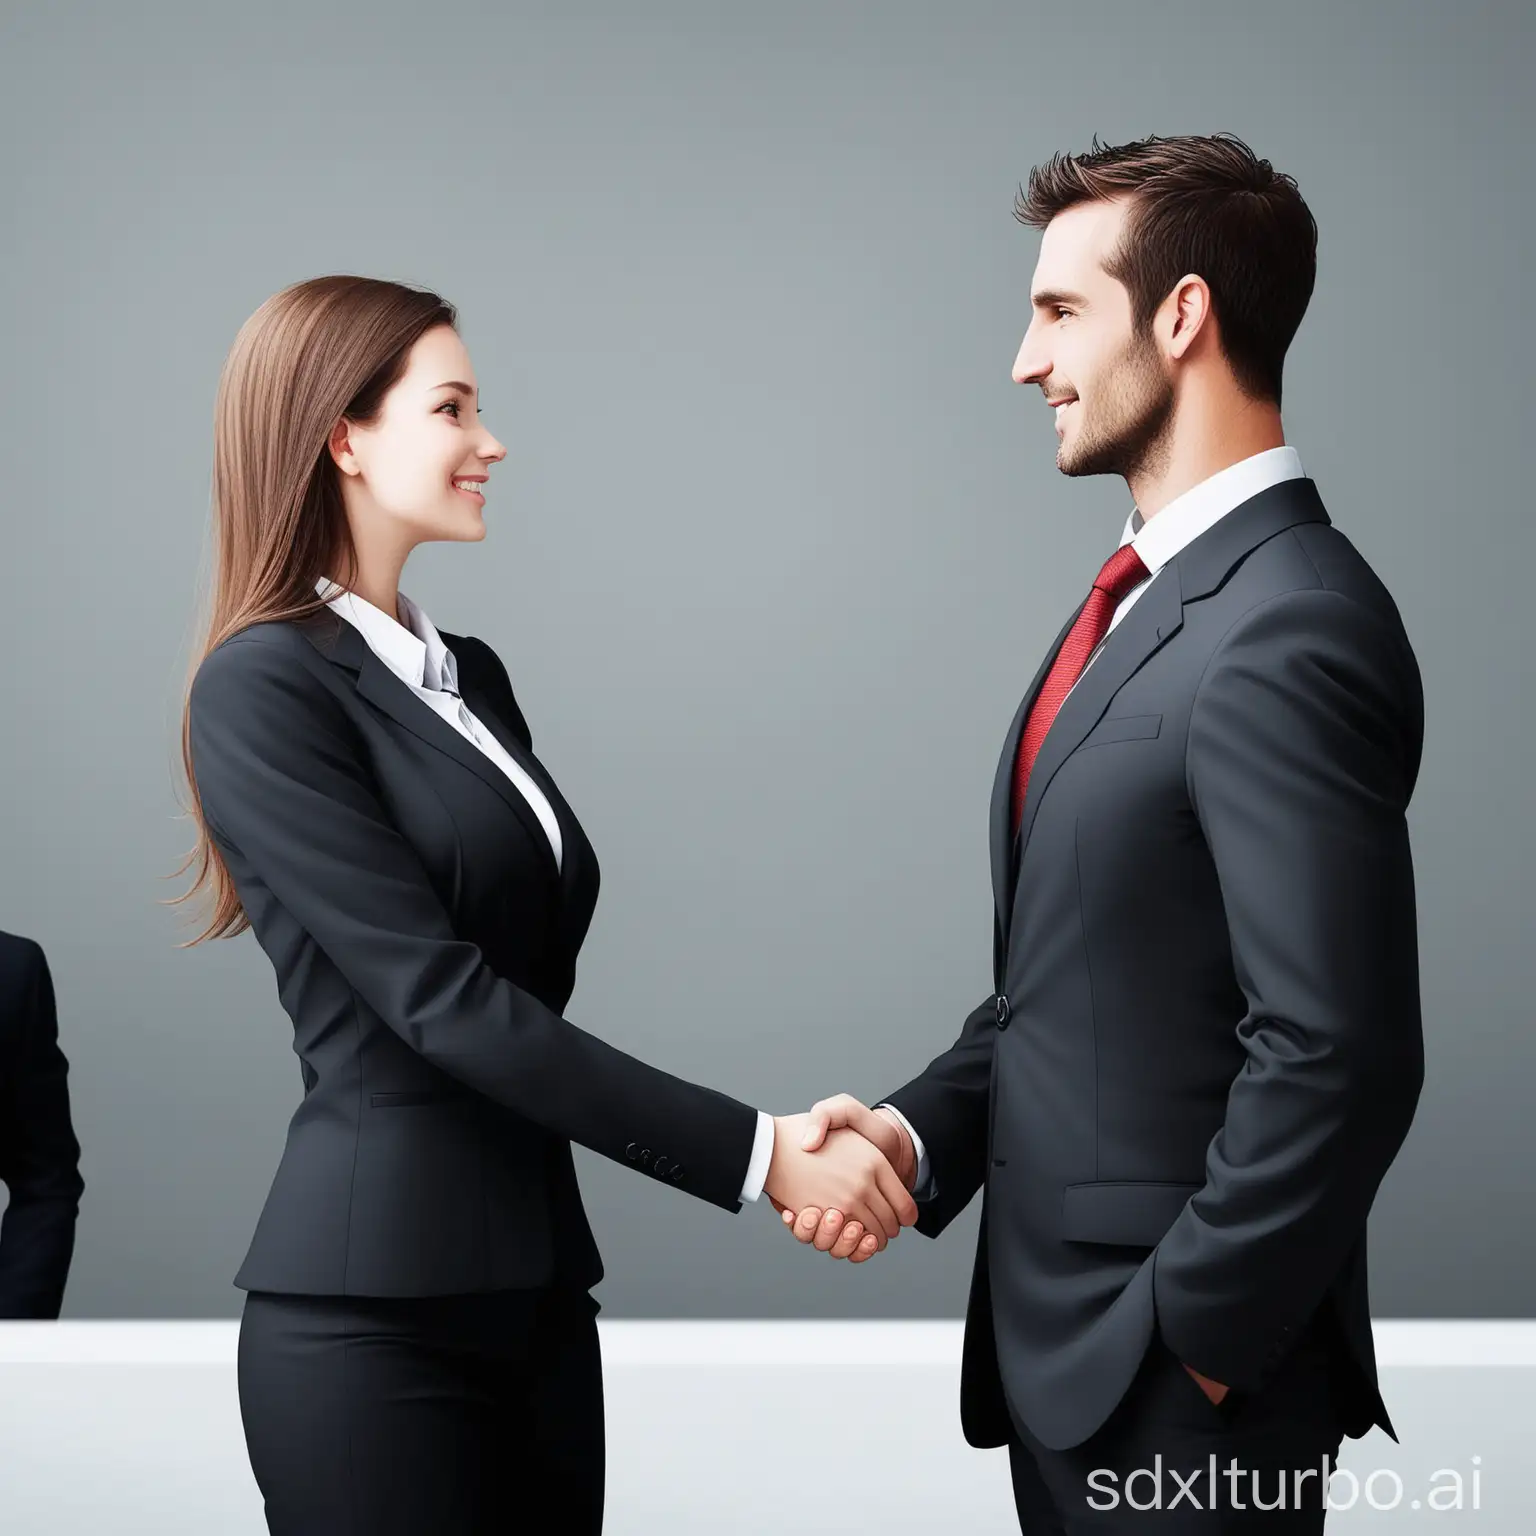 Business-Professionals-Shaking-Hands-in-Suits